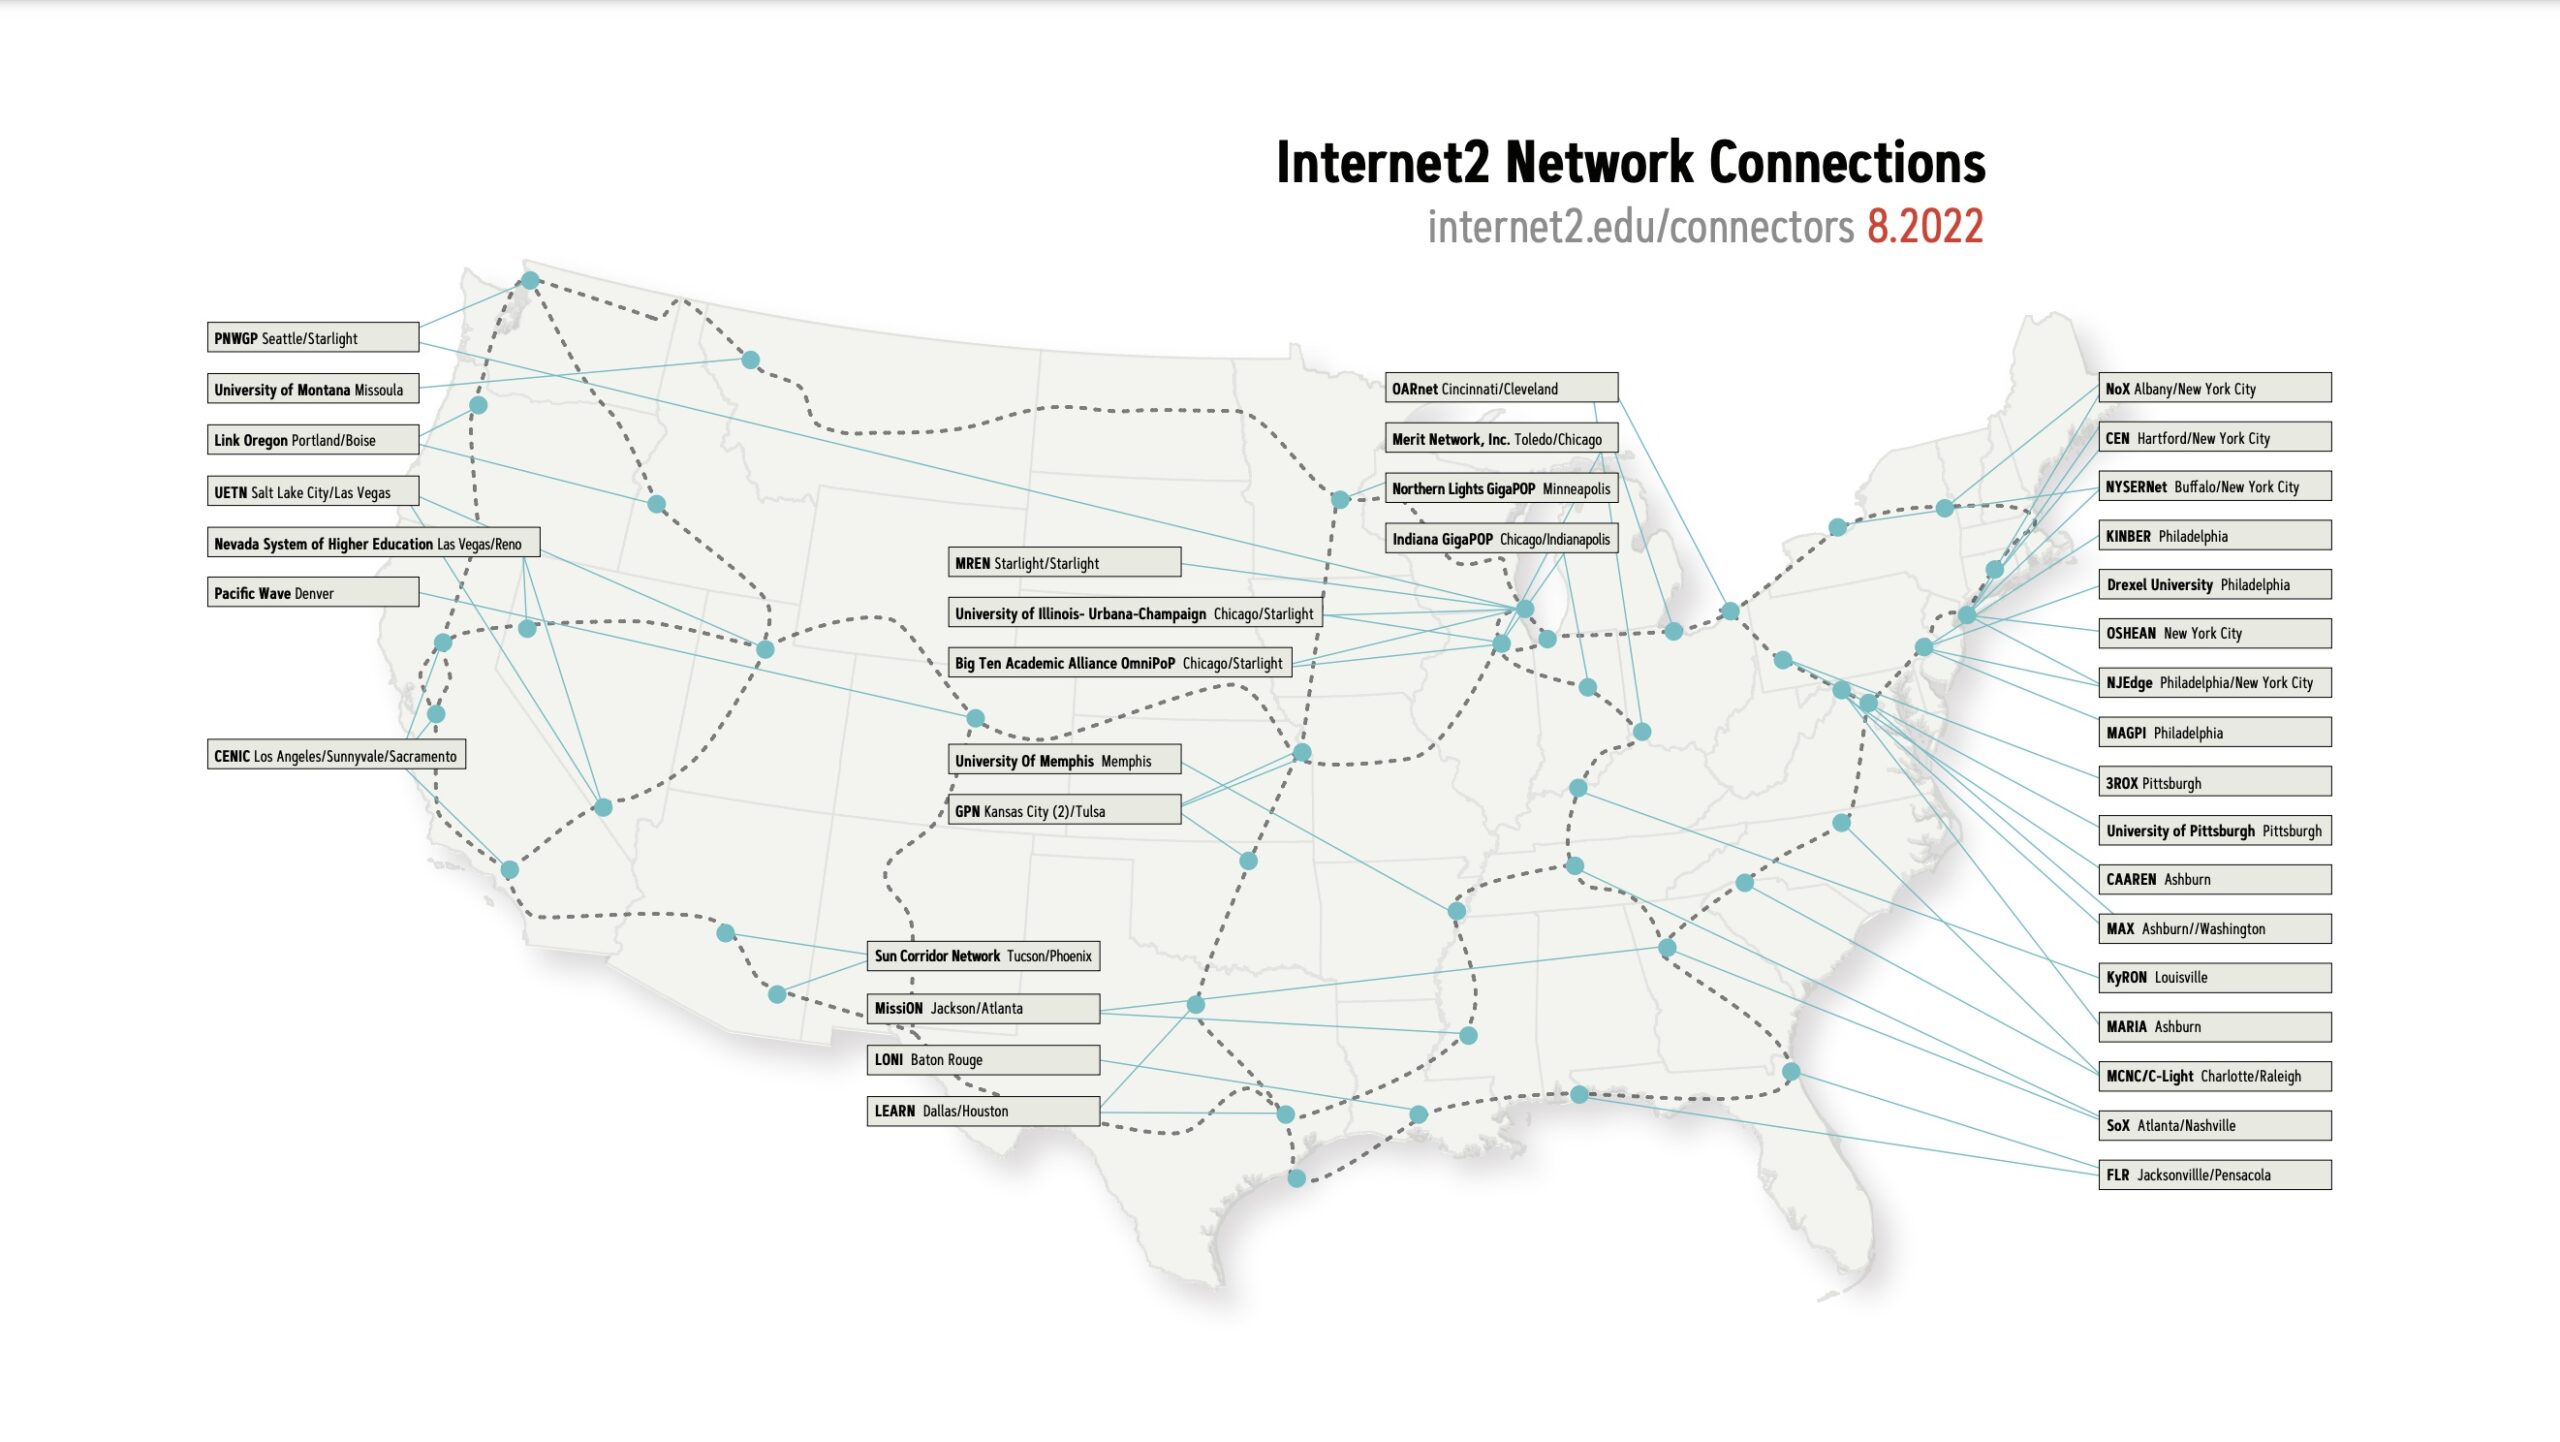 http://internet2.edu/wp-content/uploads/2022/09/n-network-connections-map-8-2022-scaled.jpg